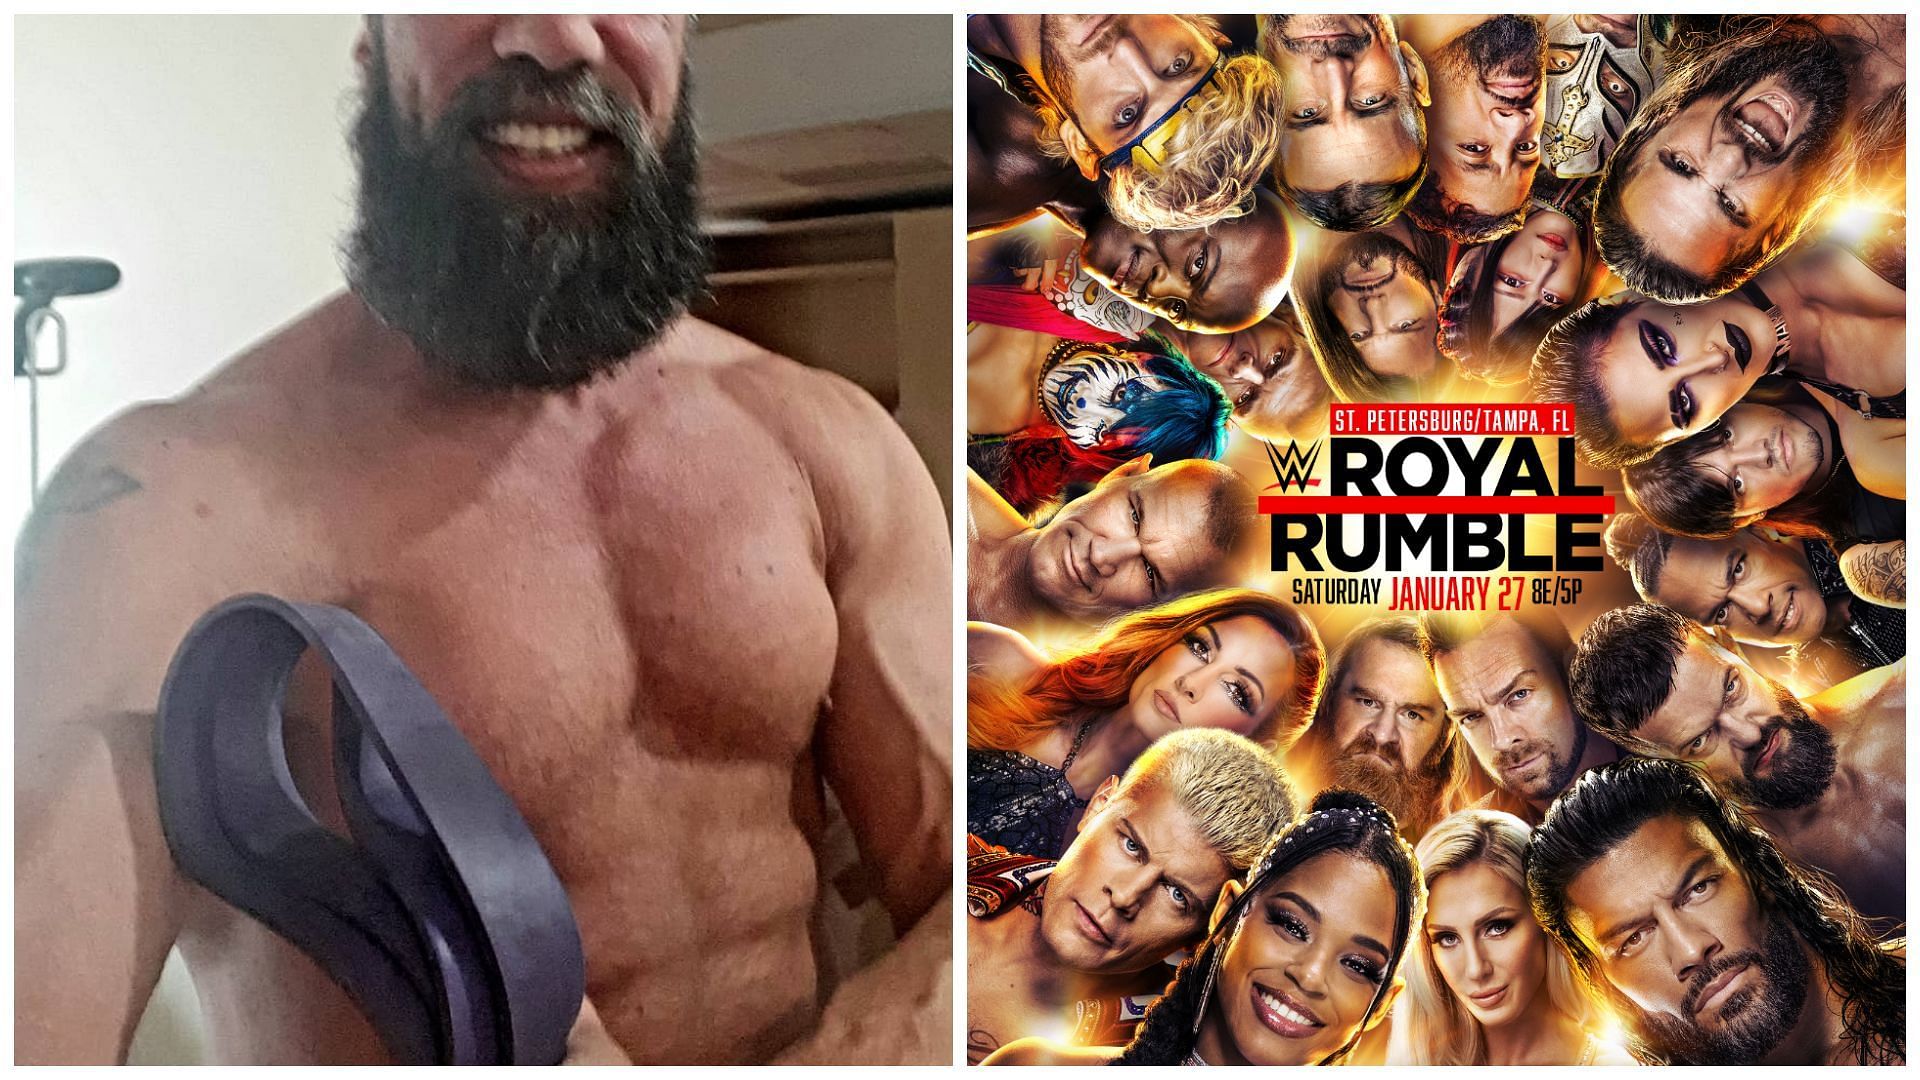 WWE Royal Rumble is set for Jan 27.